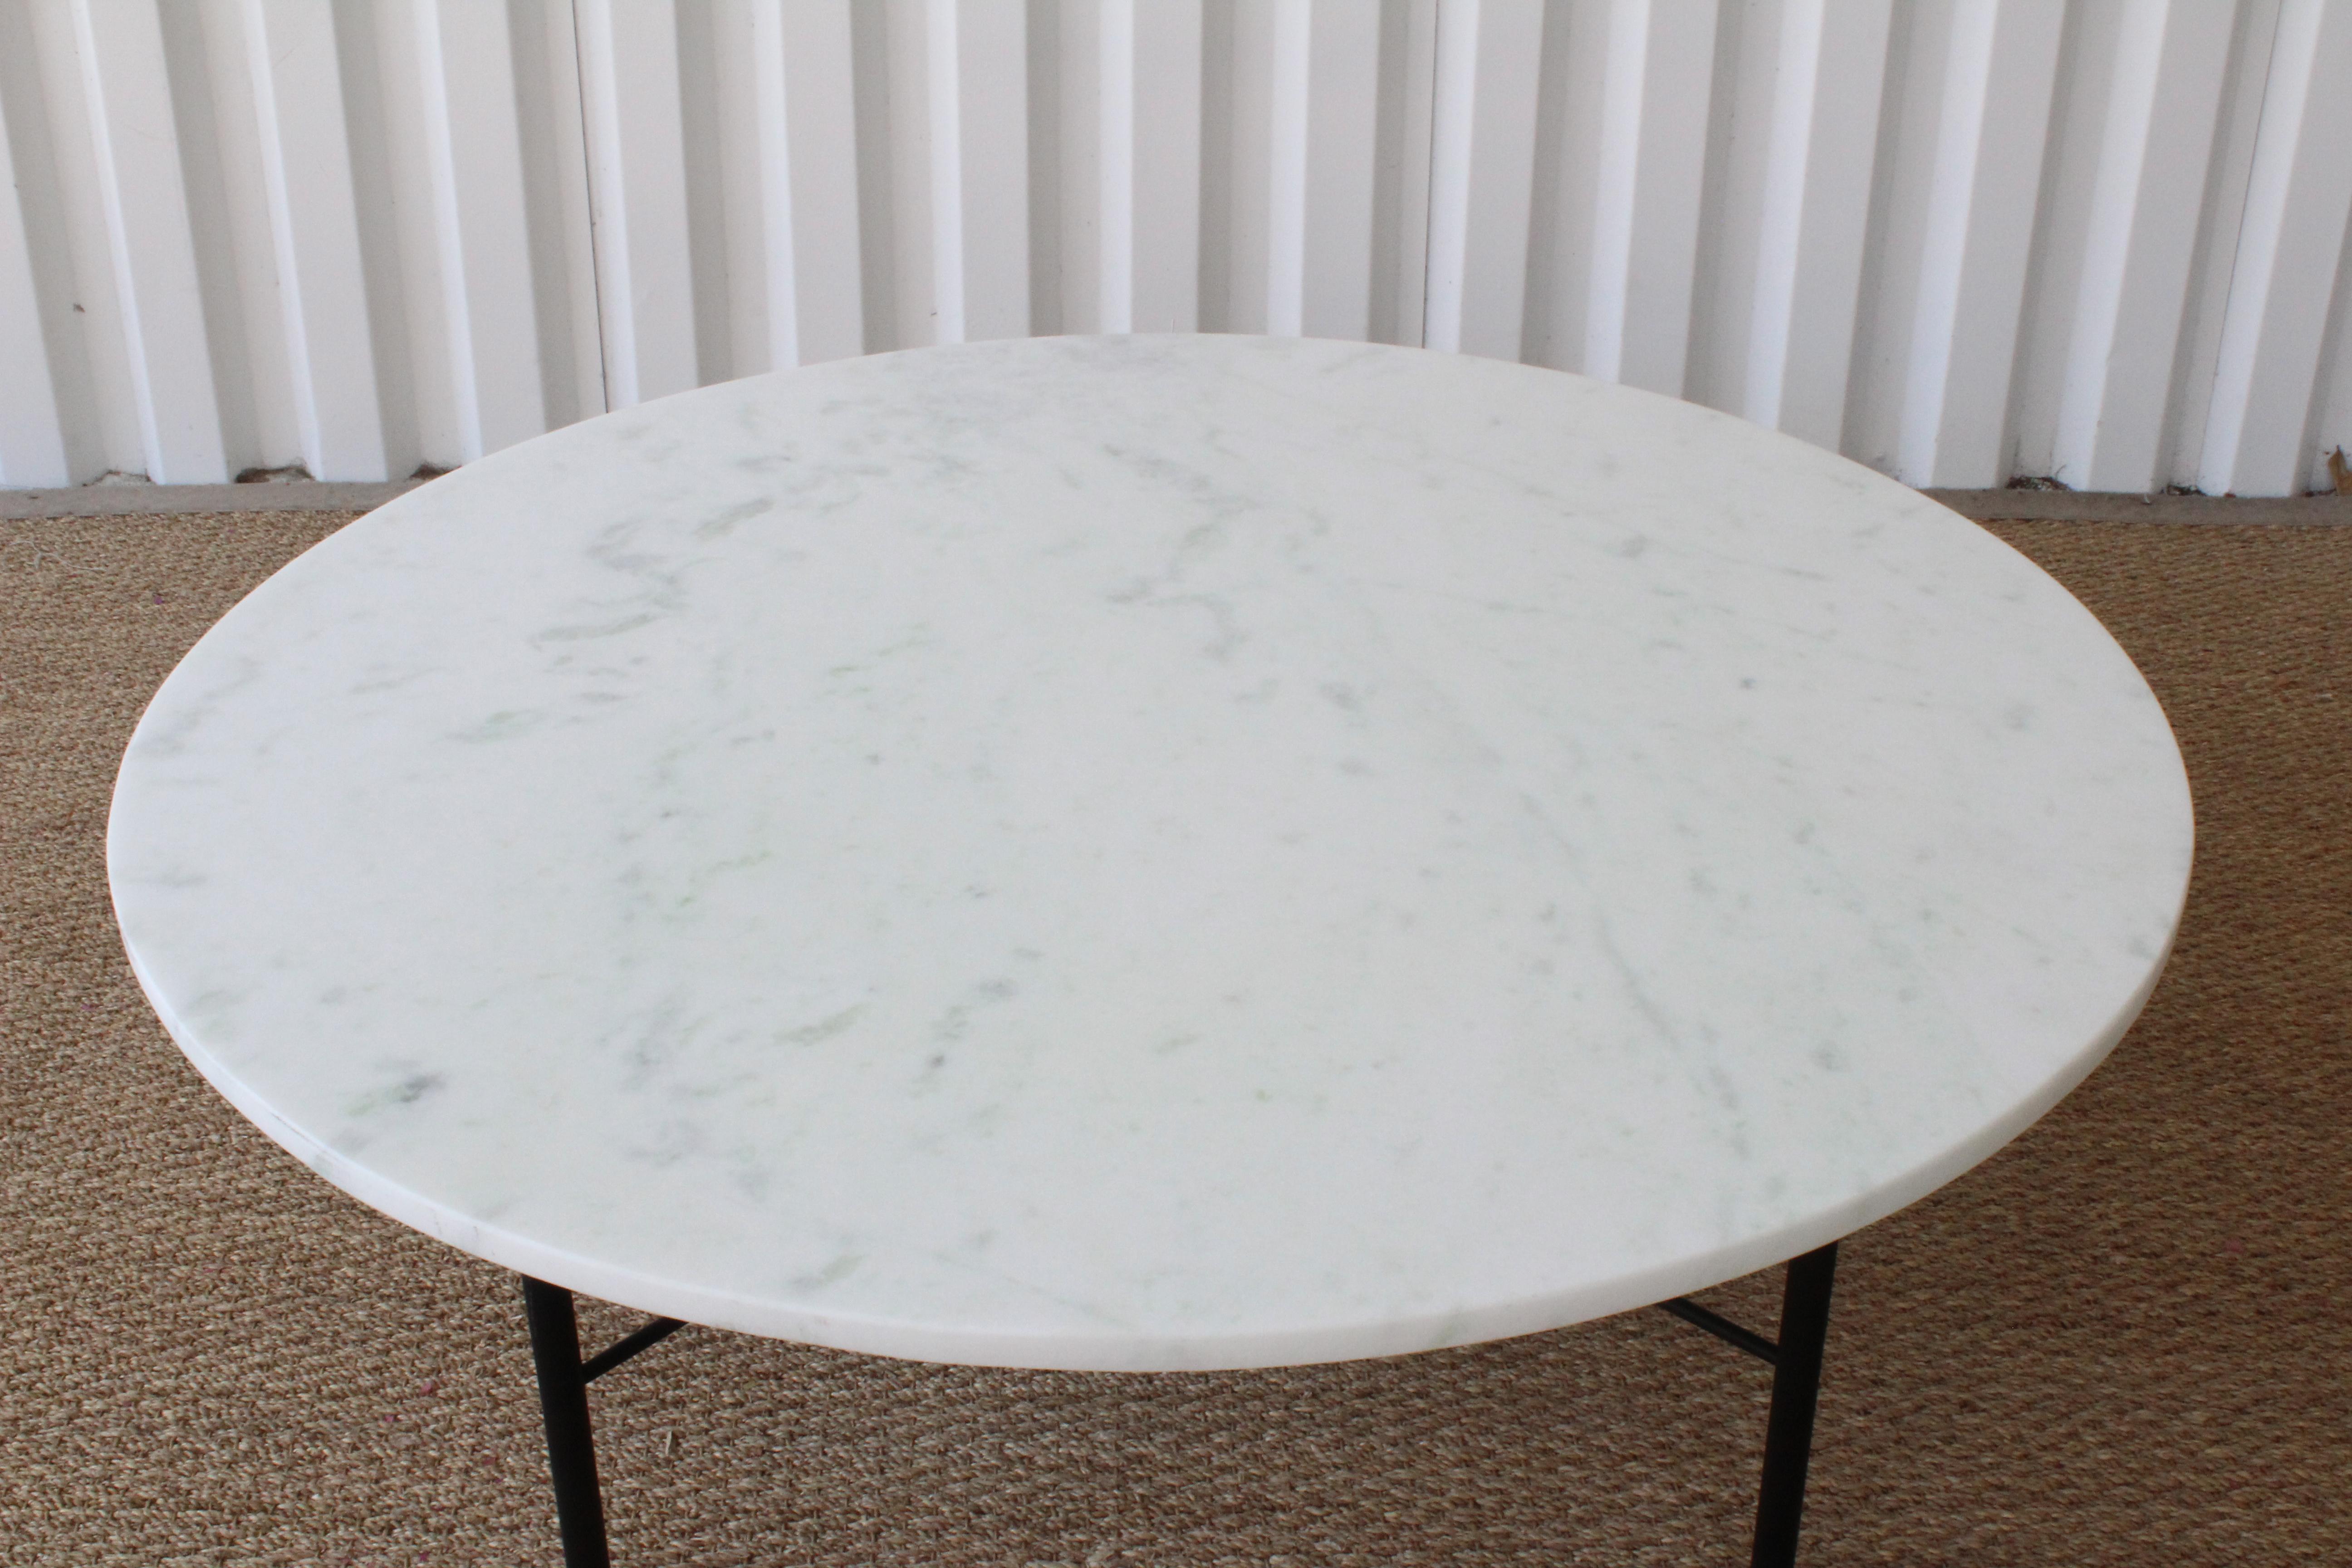 Custom marble coffee table on a steel base. The marble has been honed, meaning it has not been polished, giving it a matte appearance. Black powder-coated finish on the base.